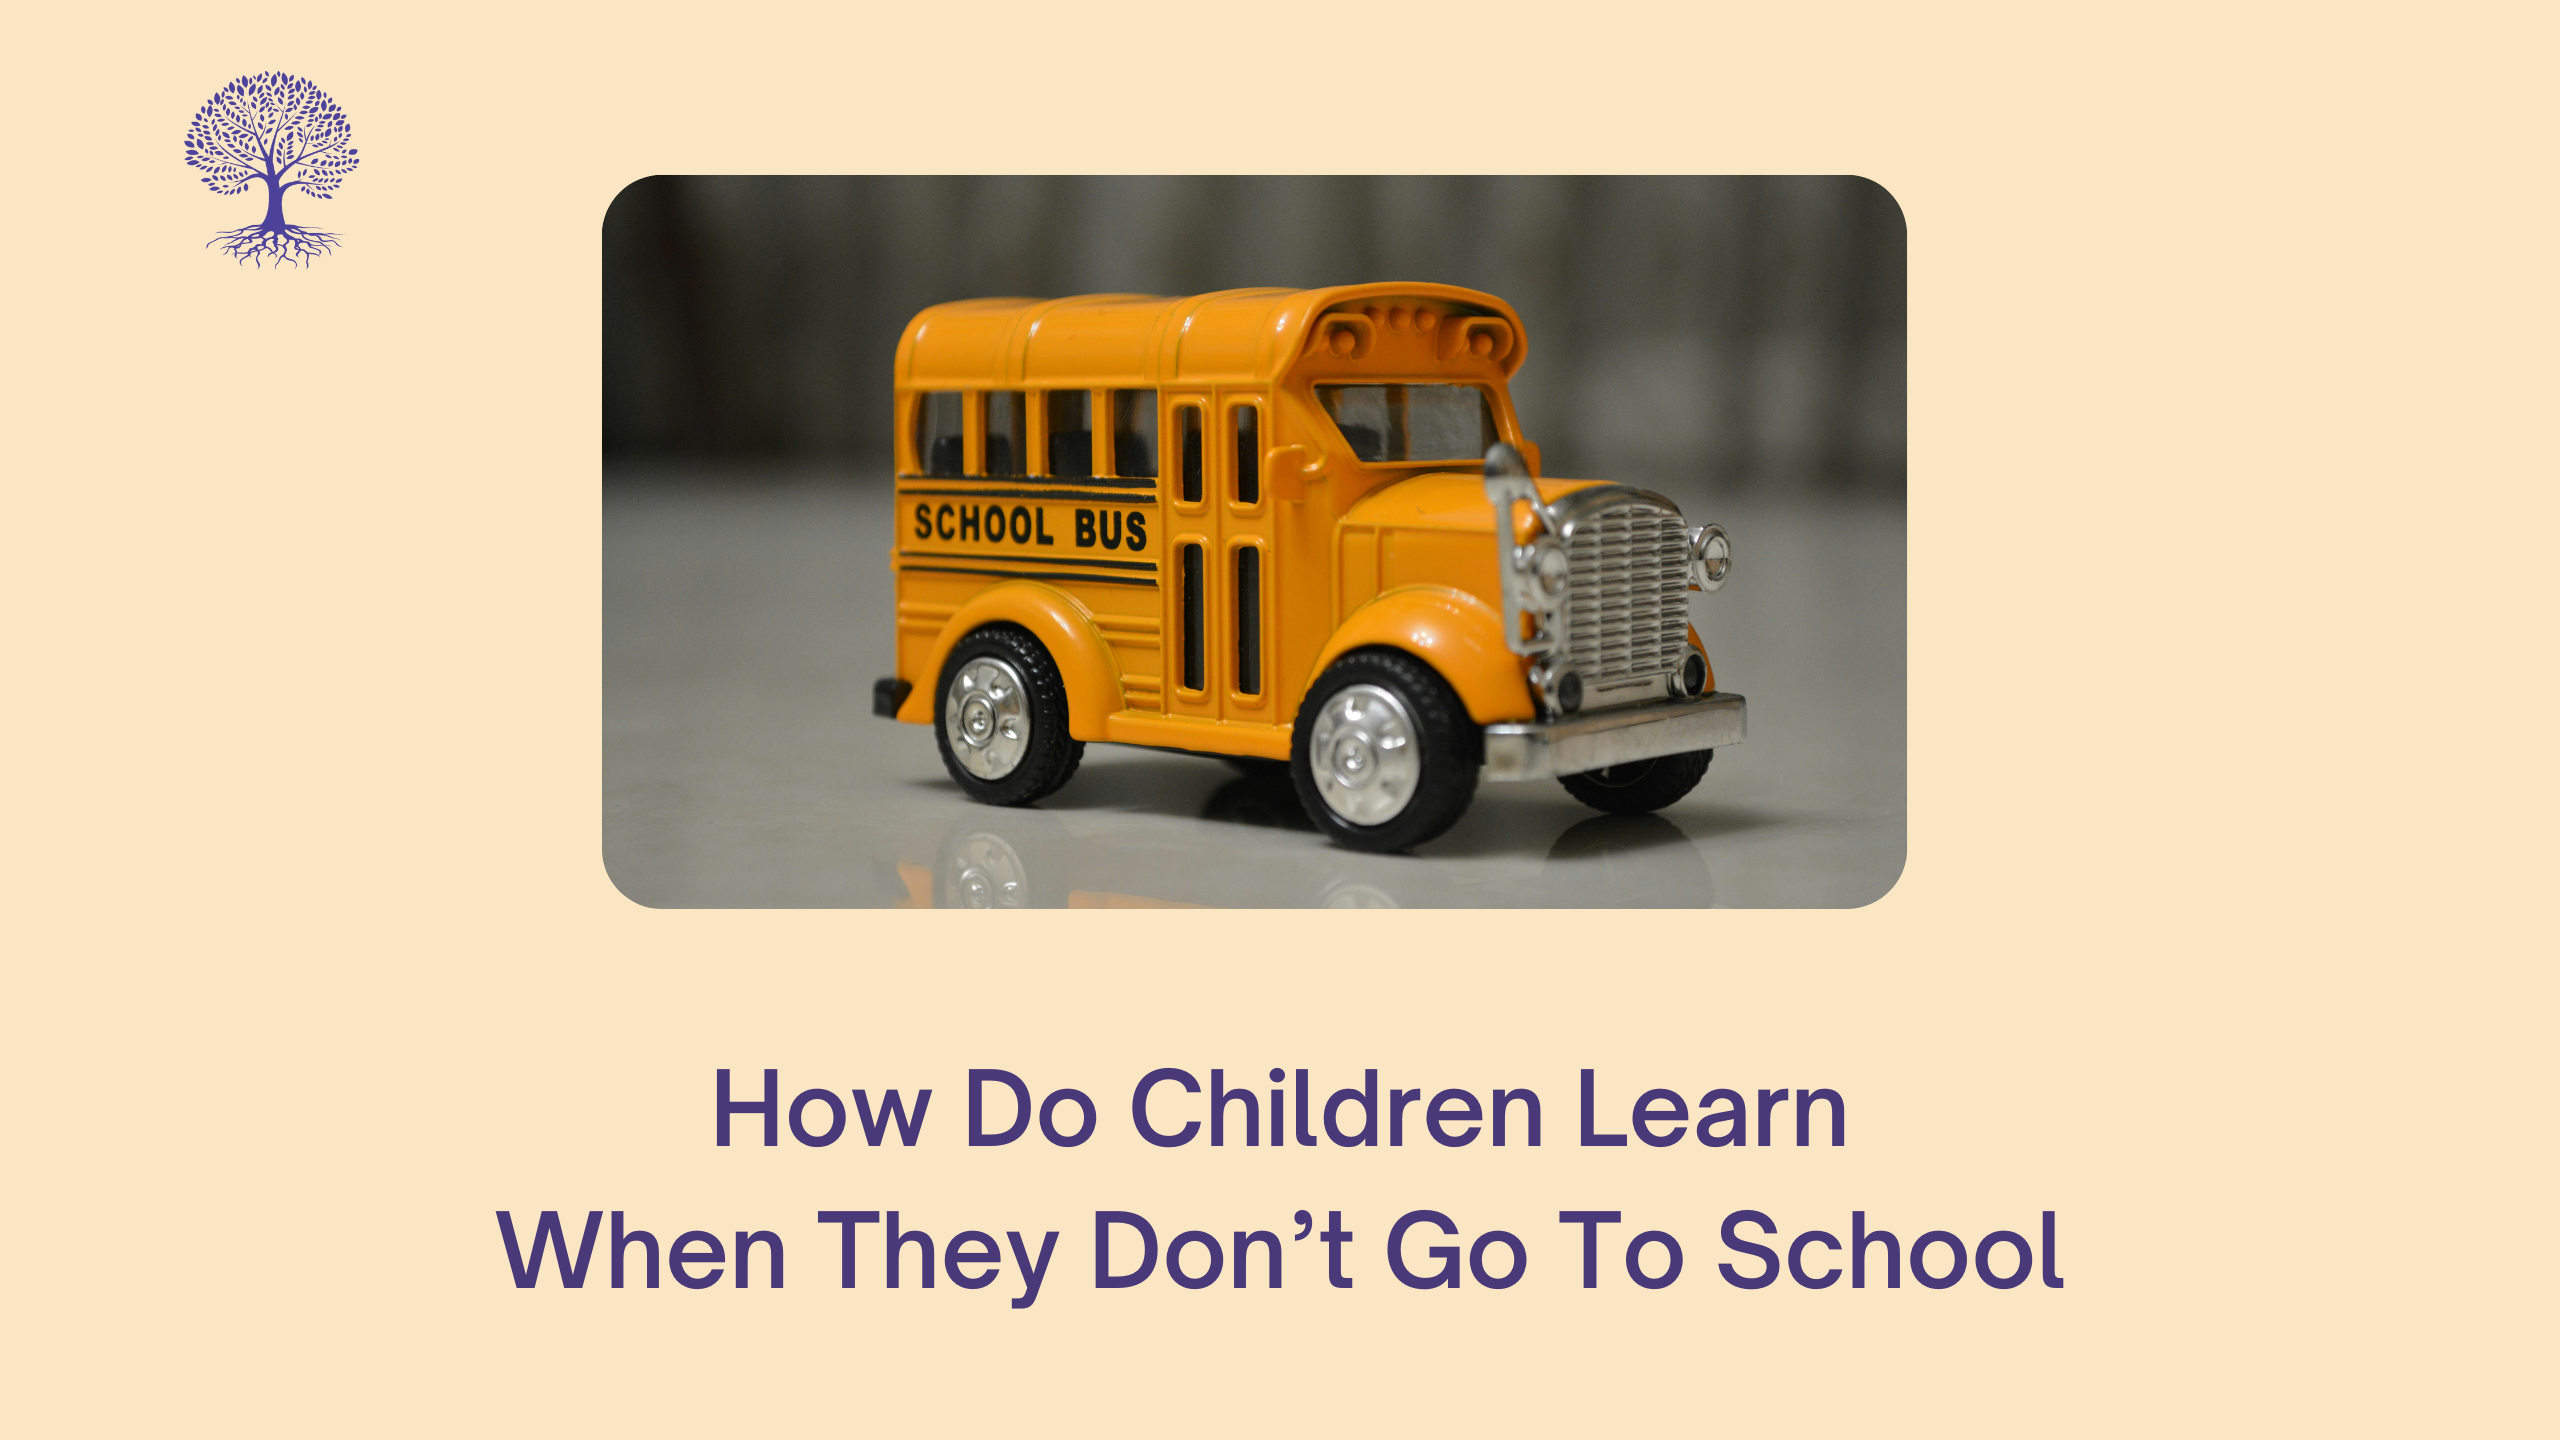 How Do Children Learn When They Don't Go To School